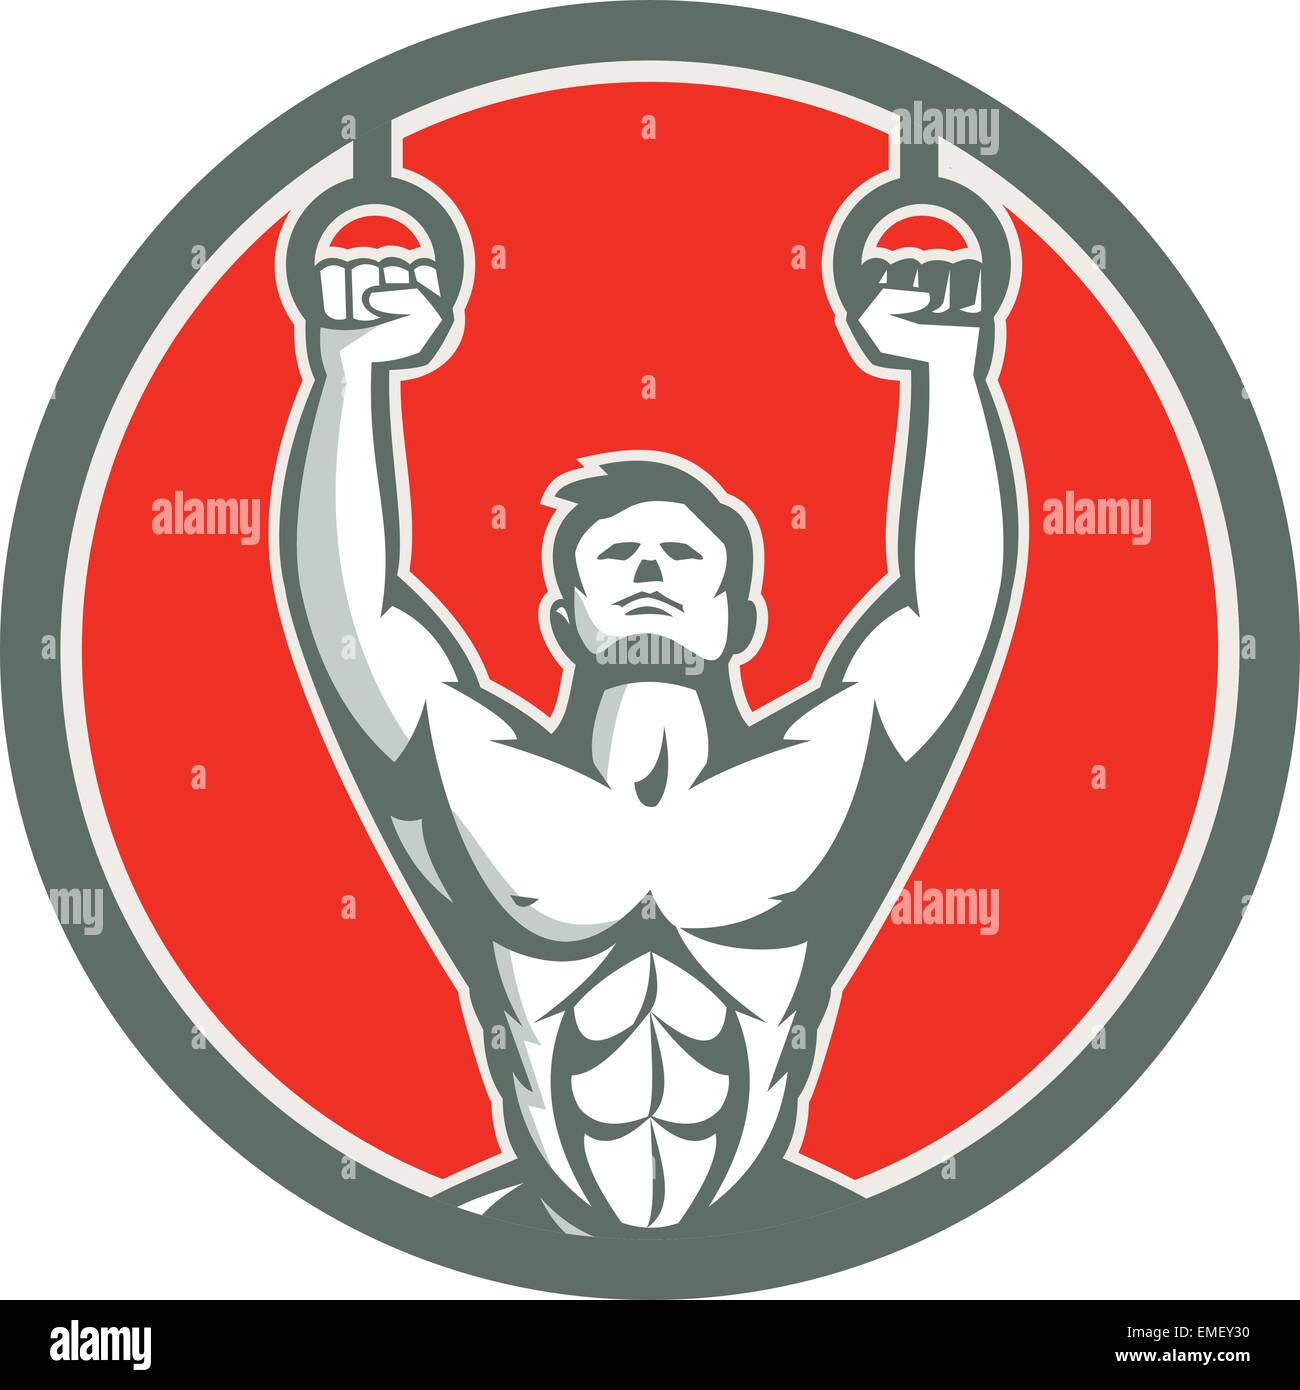 Kipping Muscle Up Cross-fit Circle Retro Stock Vector